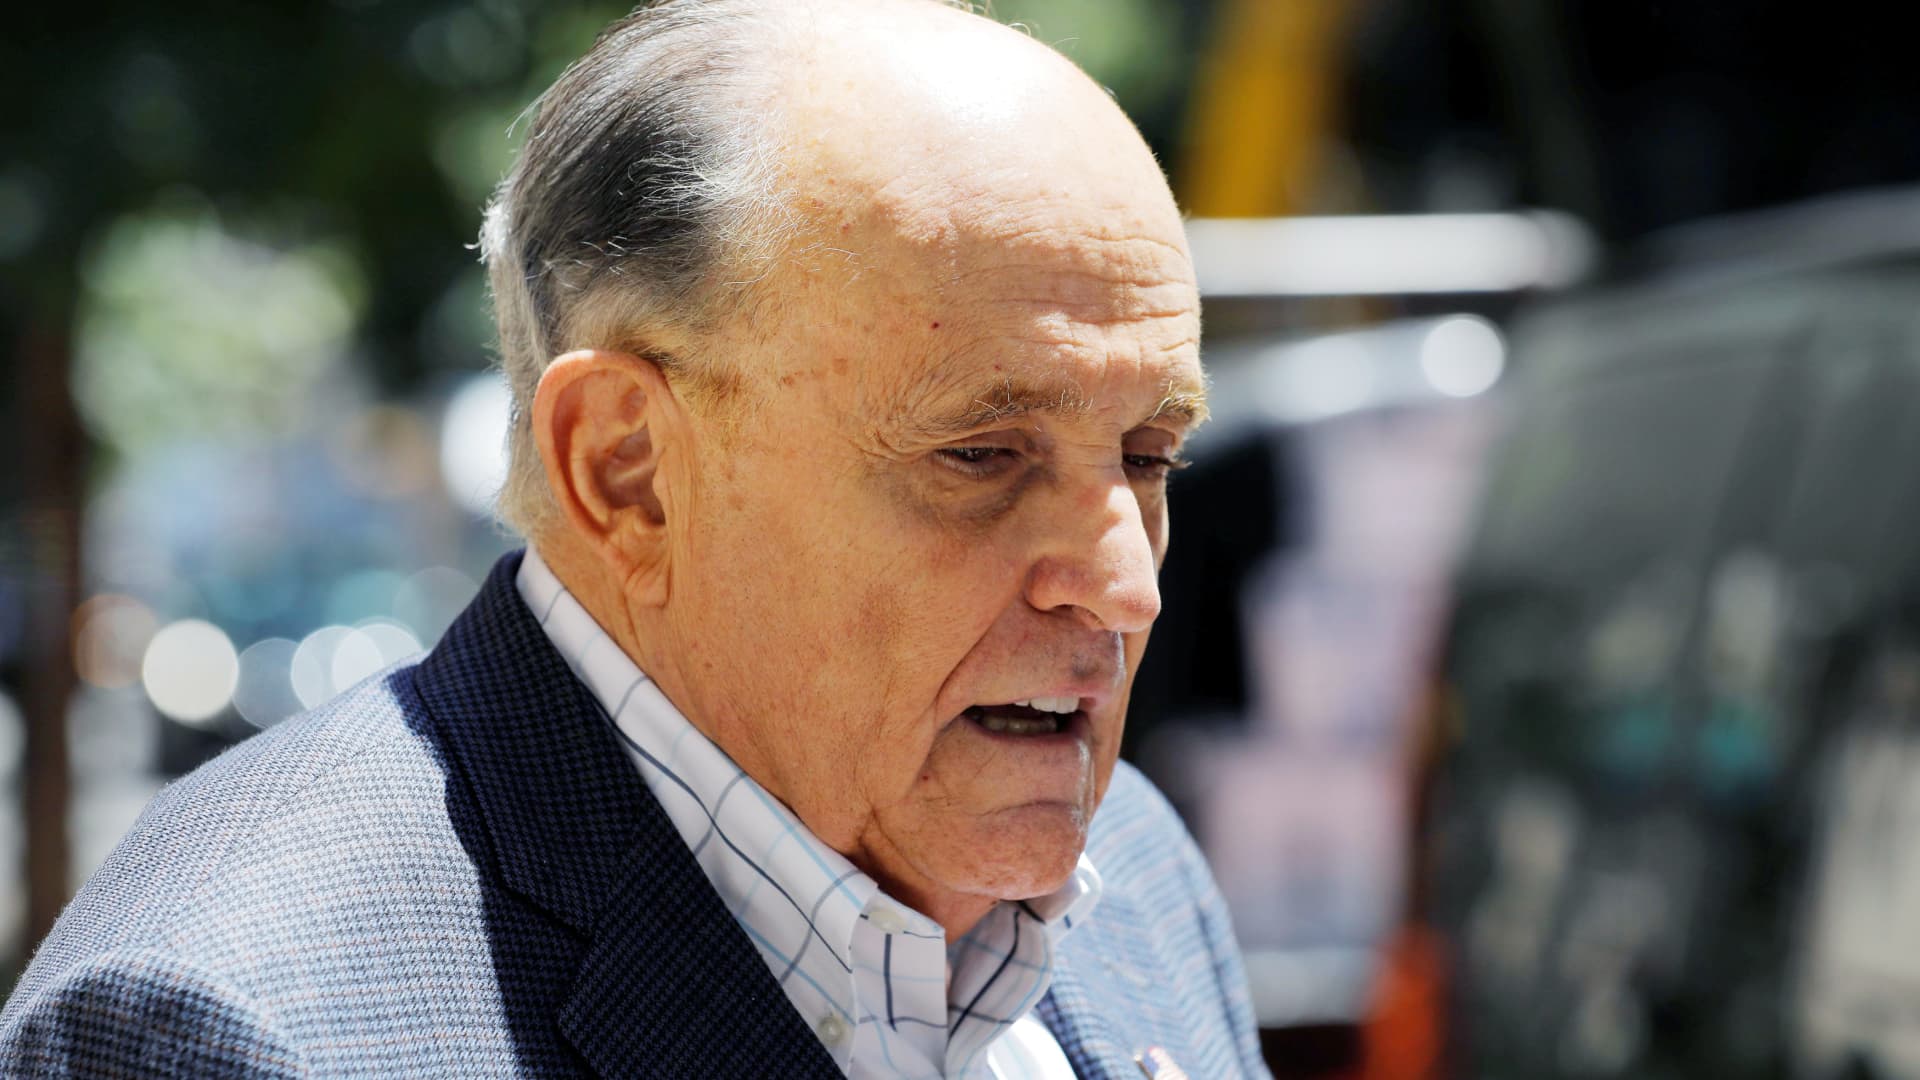 Rudy Giuliani ordered to testify at Georgia grand jury in Trump election meddling case – CNBC